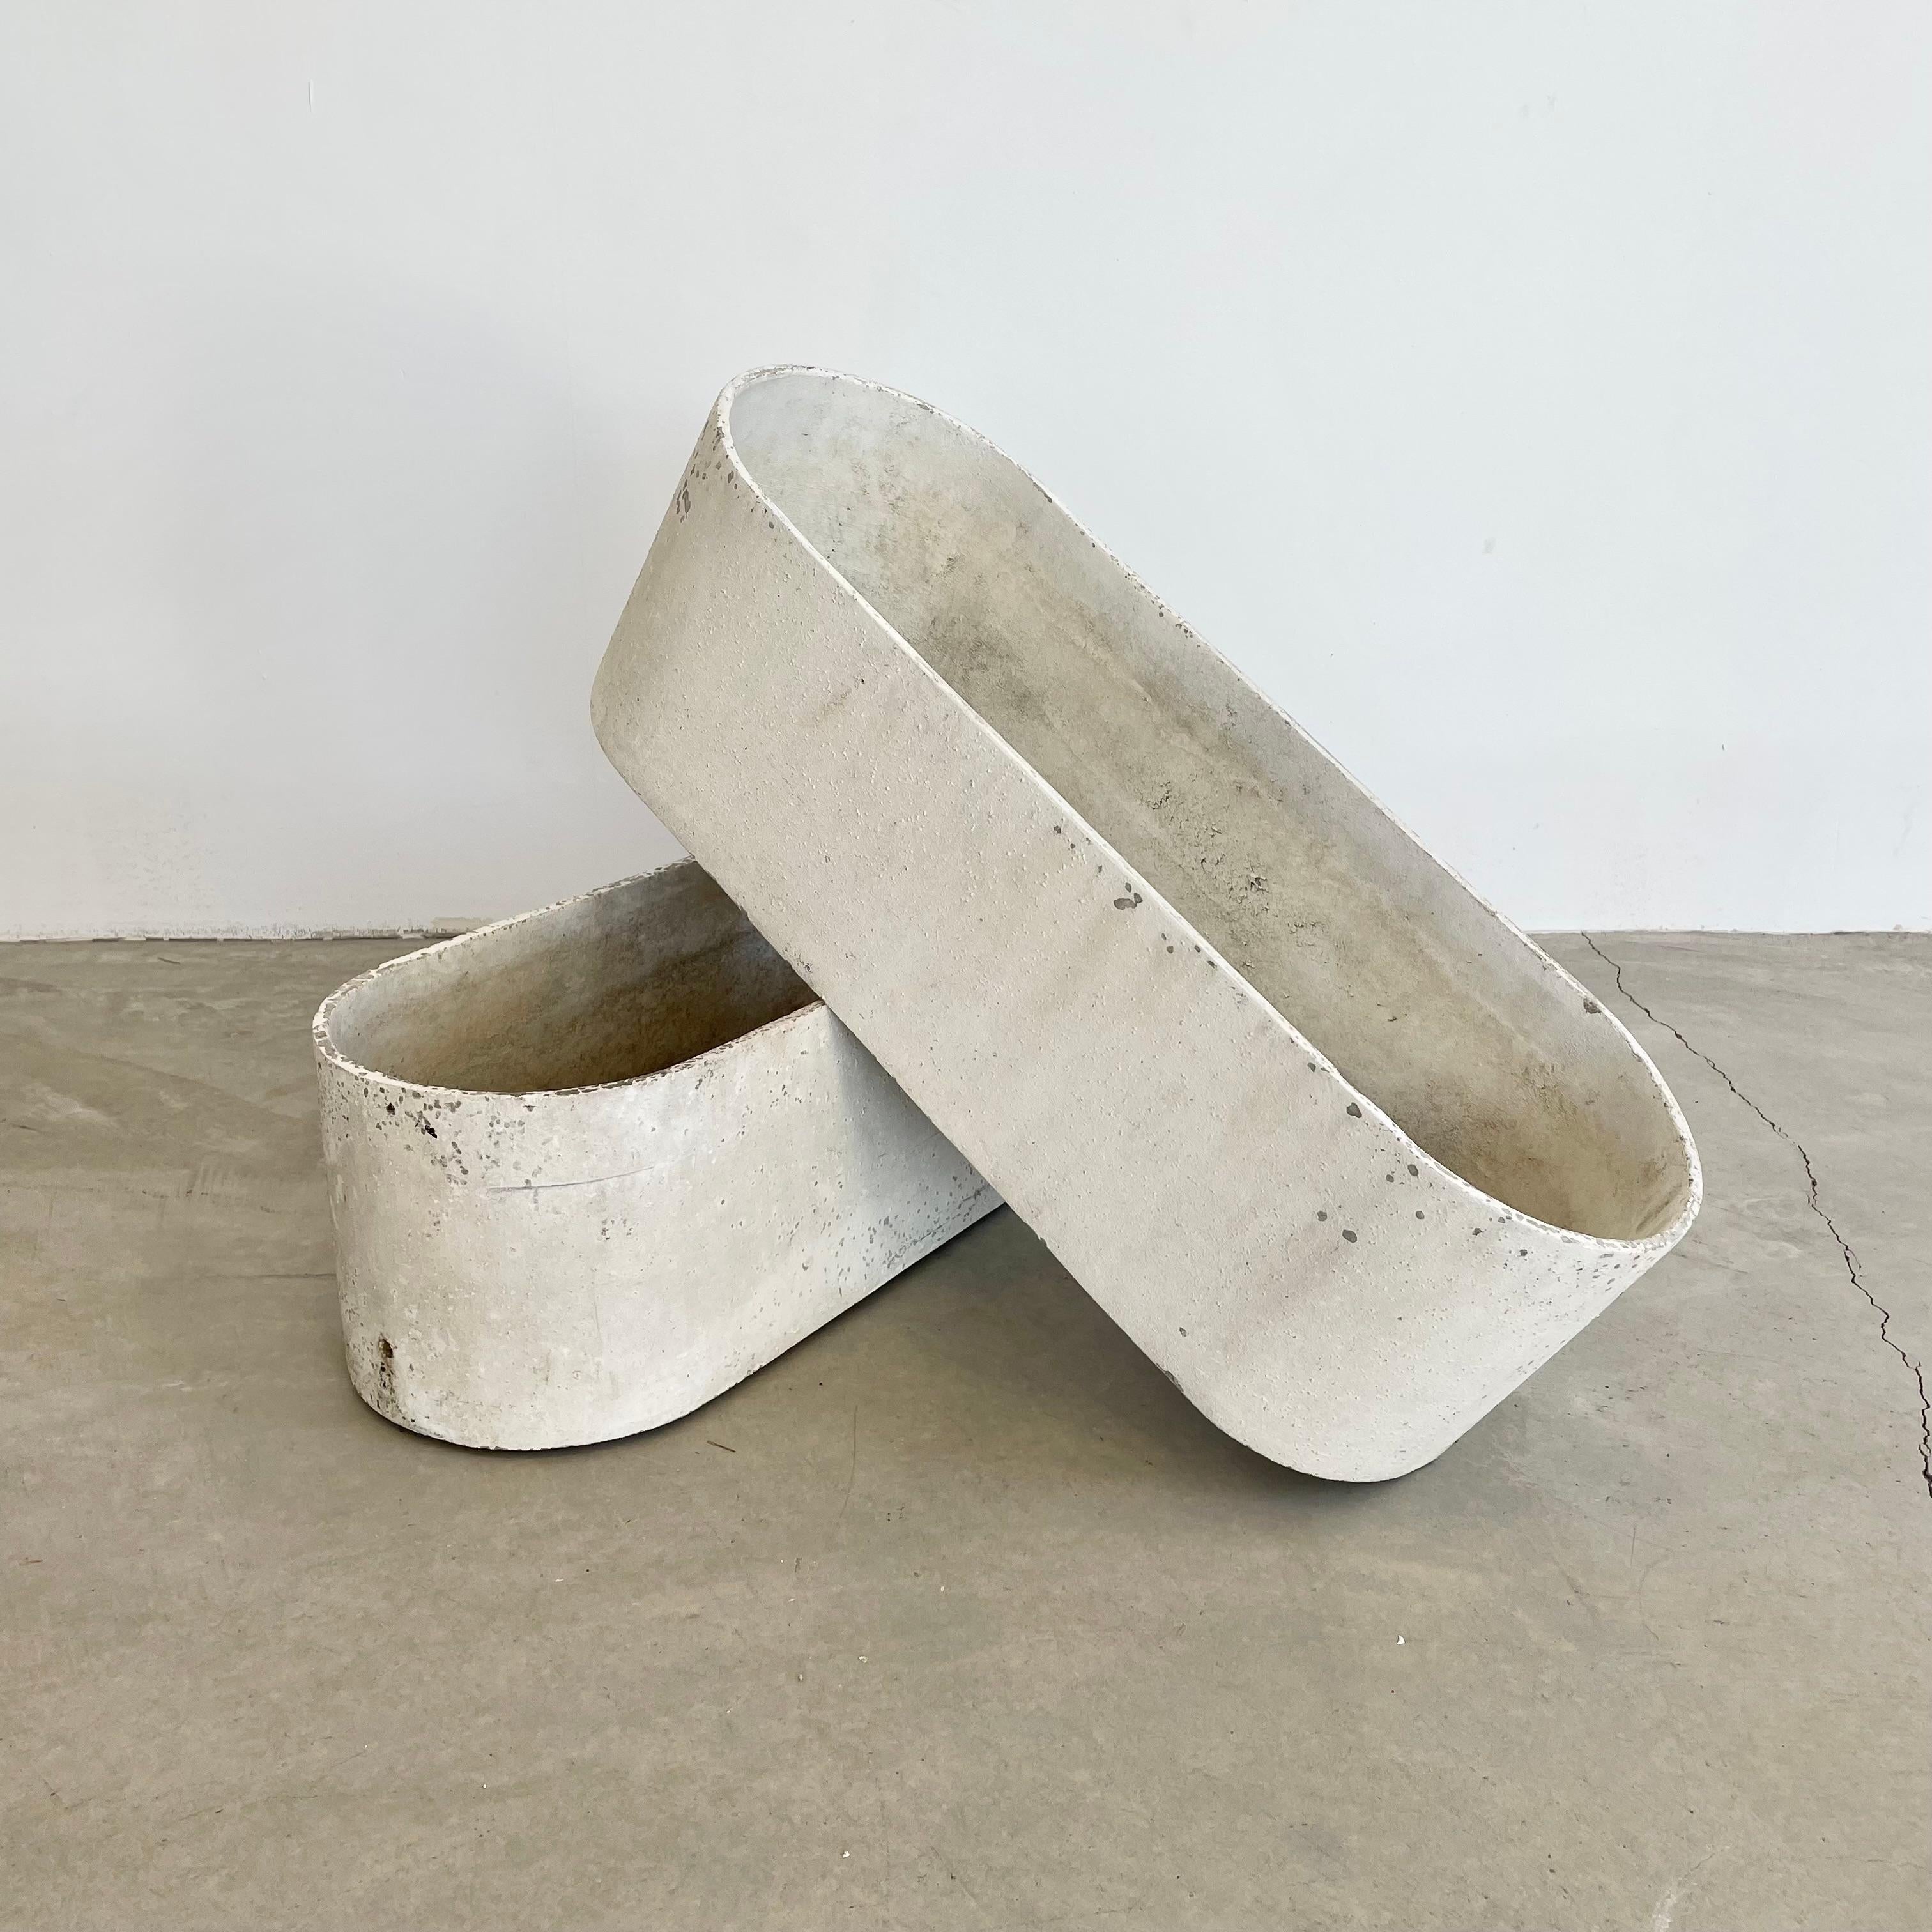 Pair of rare and unique pill shaped trough planters by Swiss architect and industrial design pioneer Willy Guhl for Eternit, Switzerland circa 1960s. Both painted white by previous owner. Factory drilled drainage holes on the ends of each planter.